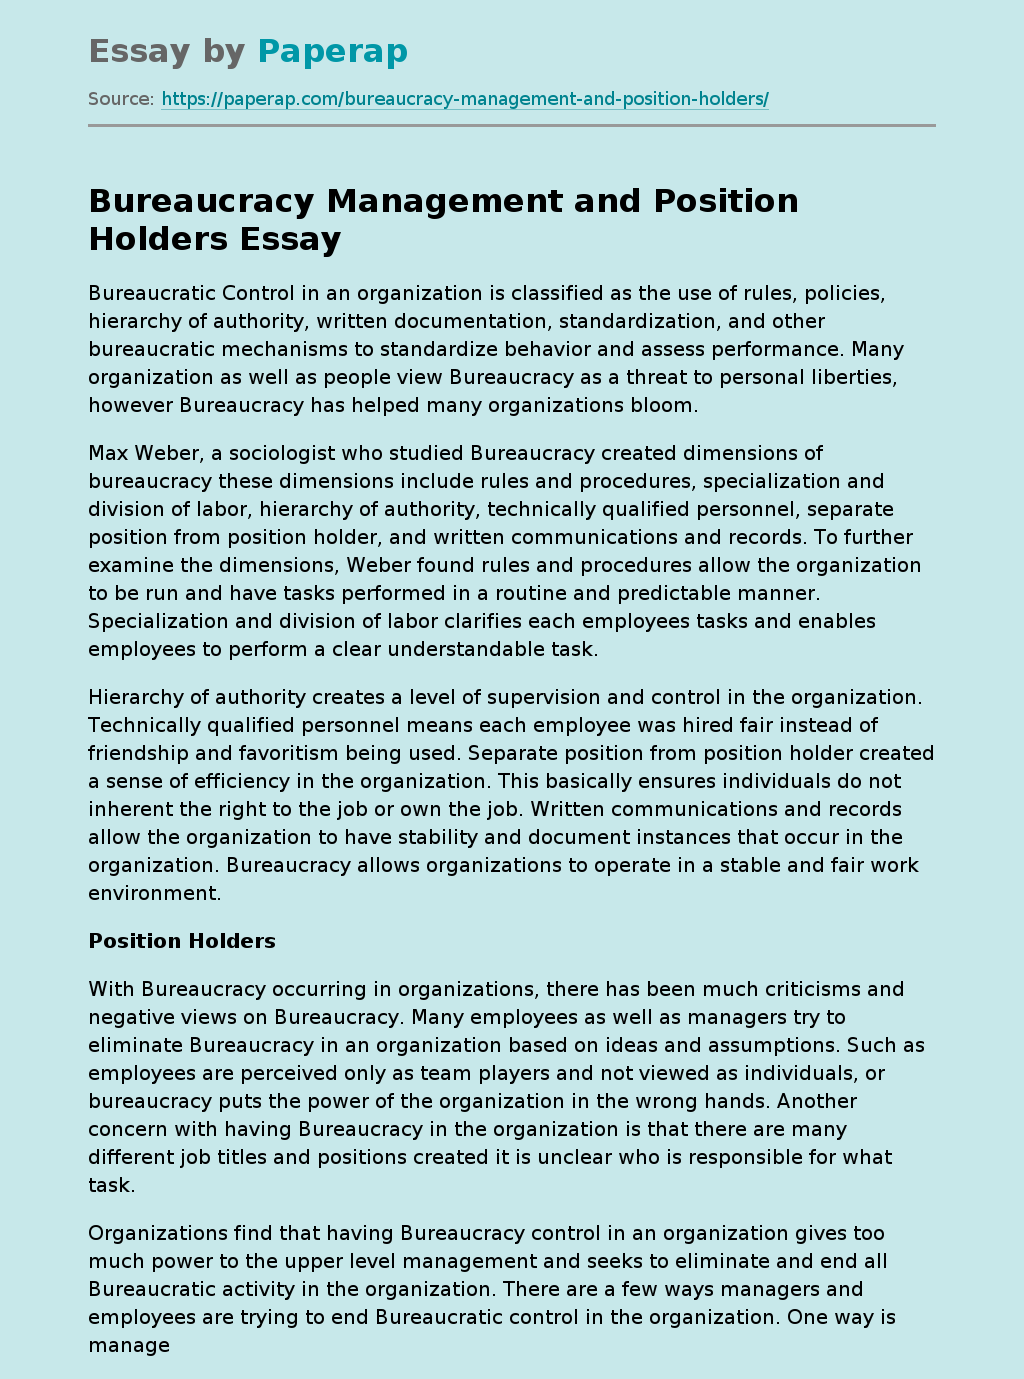 Bureaucracy Management and Position Holders